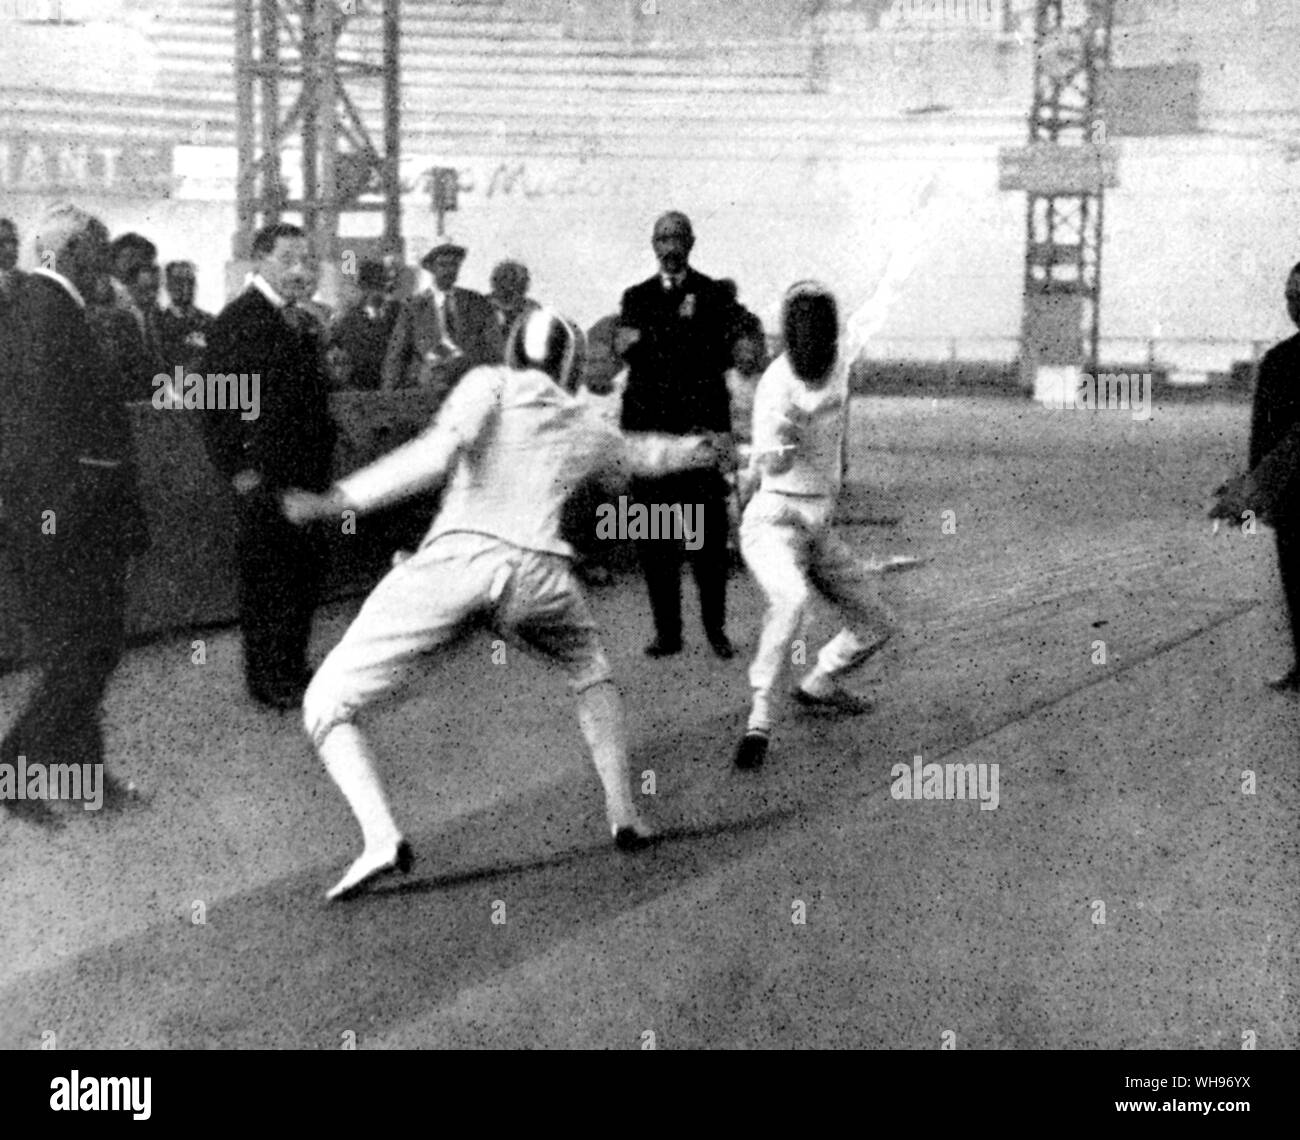 France, Paris Olympics, 1924: Roger Ducret of France in the fencing.. Stock Photo